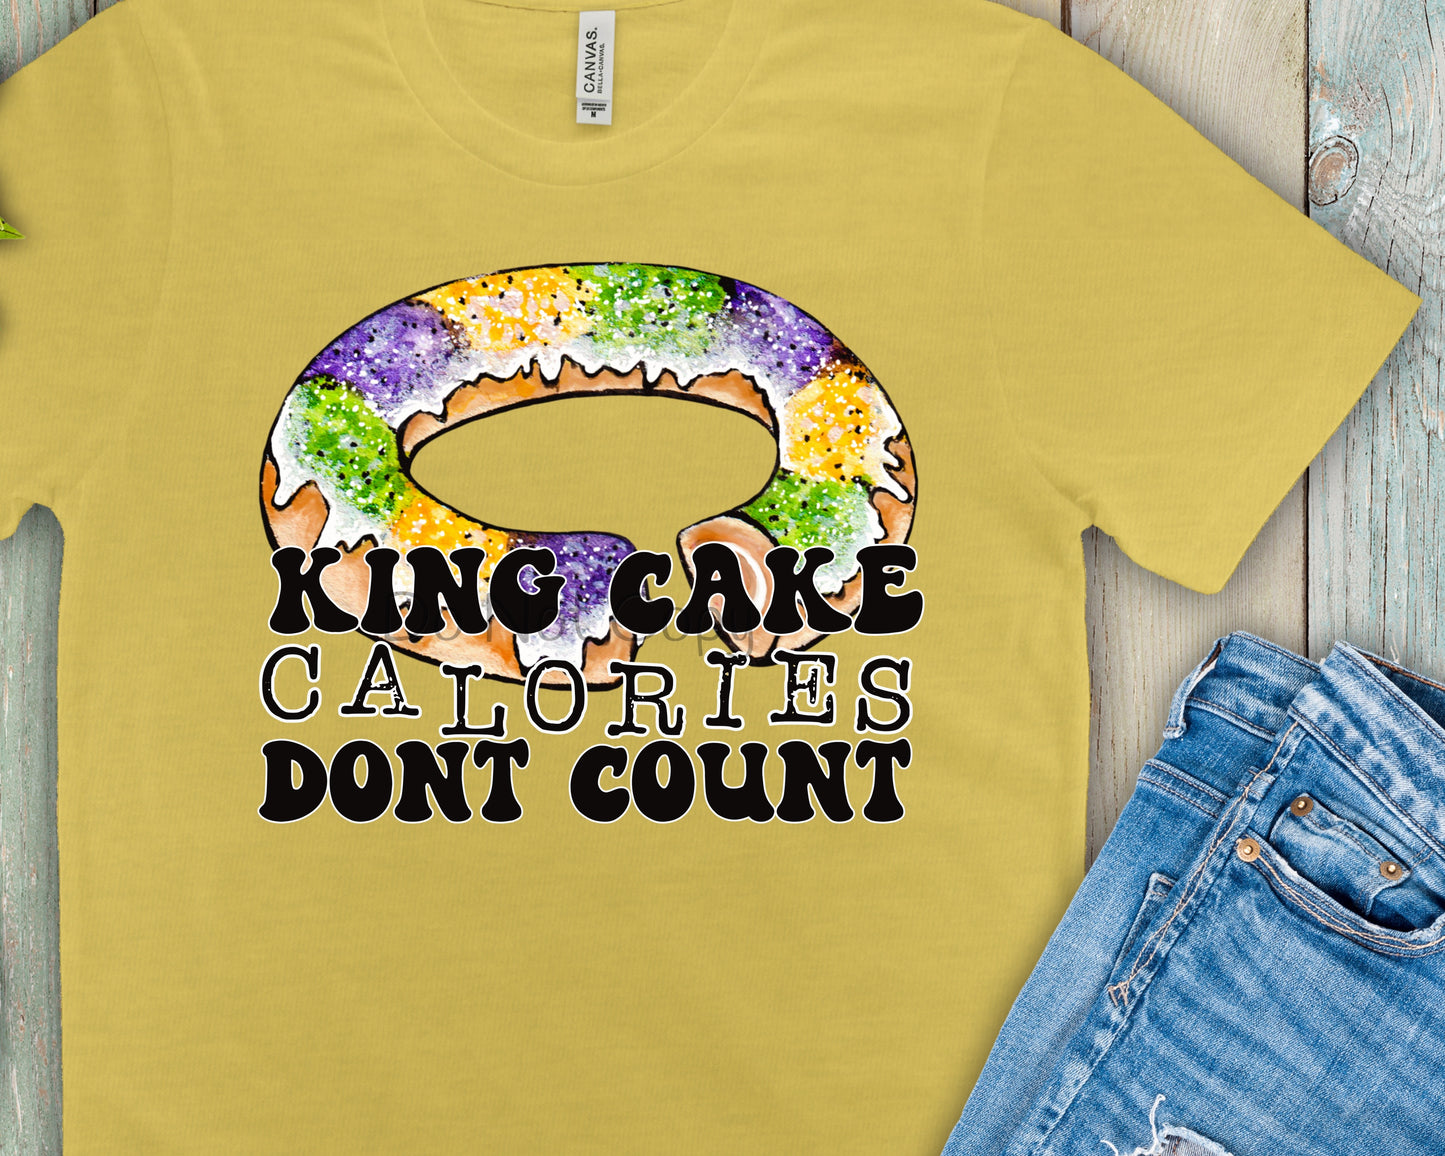 King cake calories don’t count-DTF